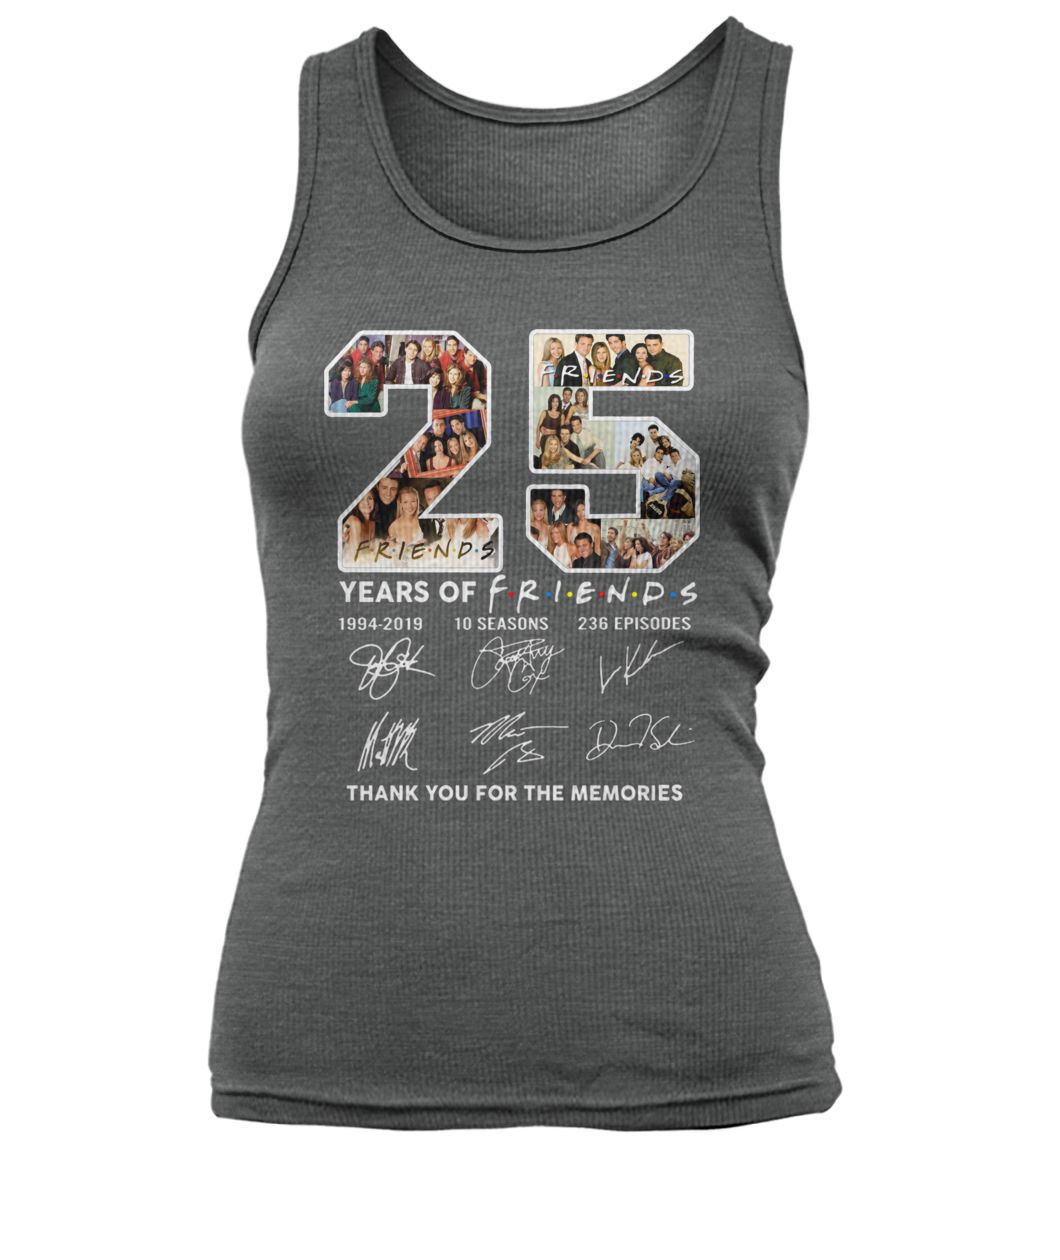 25 years of Friends 1994 2019 10 seasons 236 episodes signature thank you for the memories women's tank top